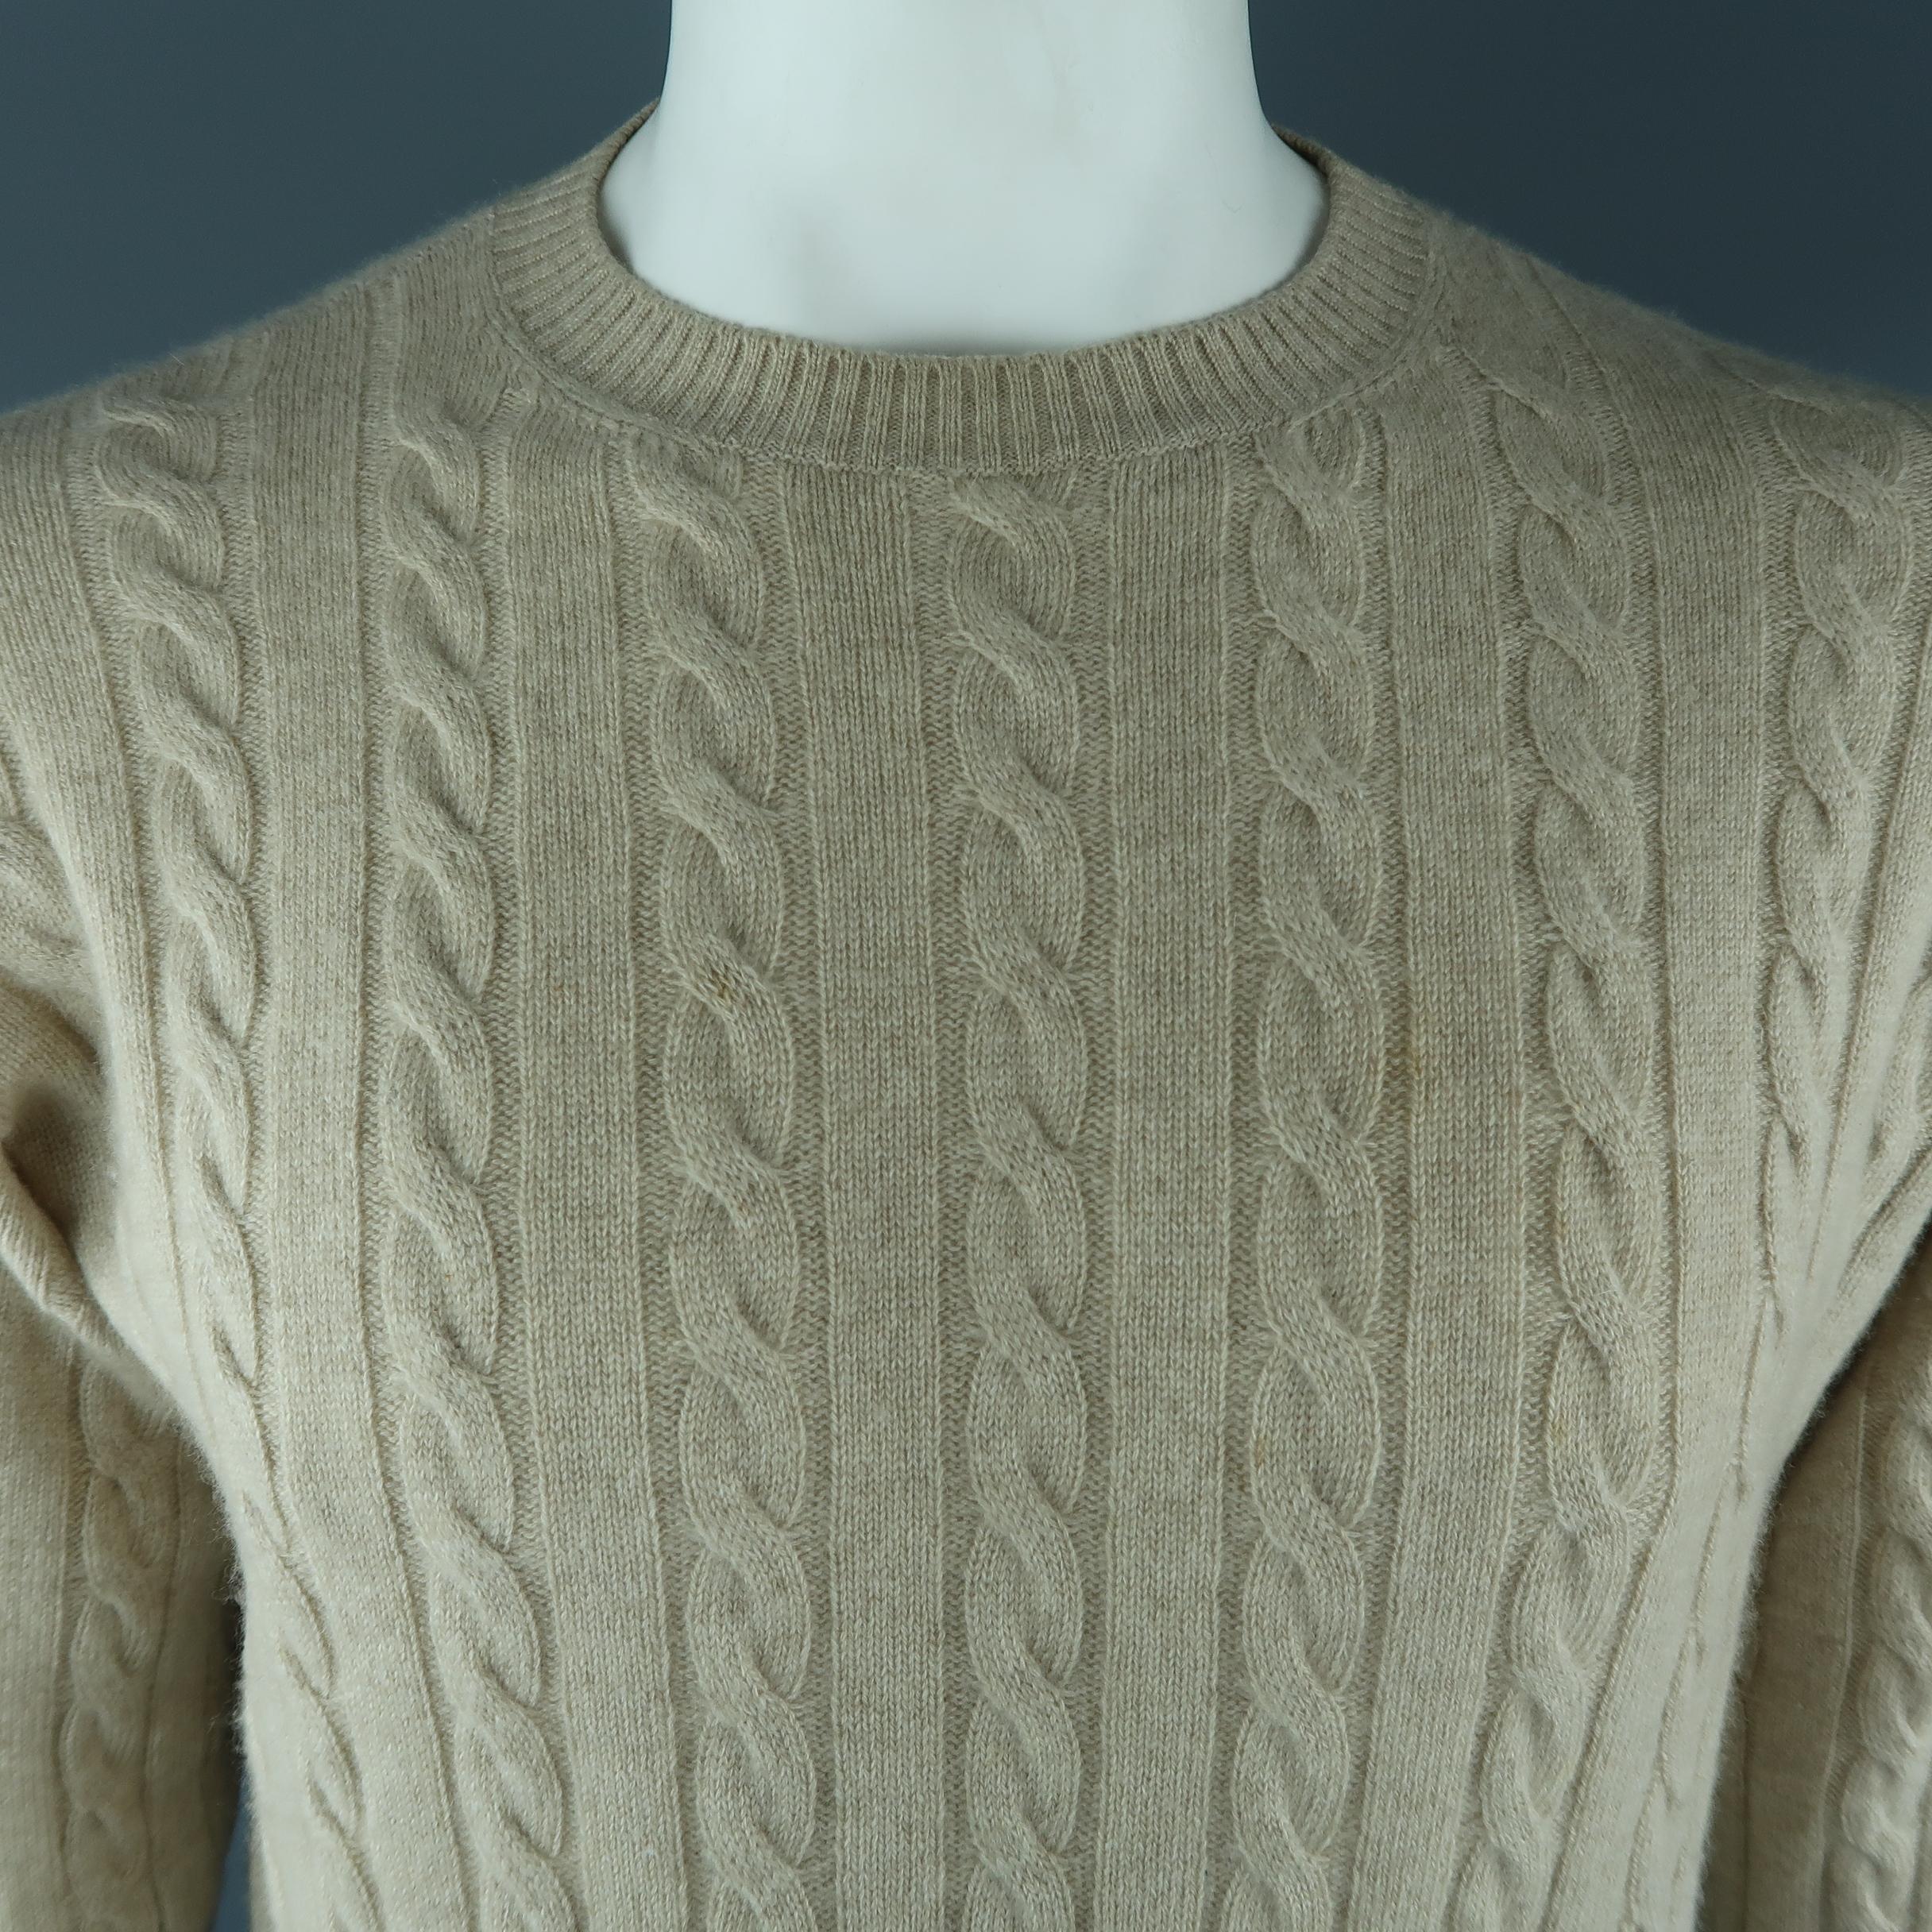 LORO PIANA sweater come in cashmere in a khaki tone, cable knit, with a crewneck and ribbed cuffs and waistband. Made in Italy.
 
Excellent Pre-Owned Condition.
Marked: 50 IT
 
Measurements:
 
Shoulder: 17.5  in.
Chest: 48  in.
Sleeve: 26.5 